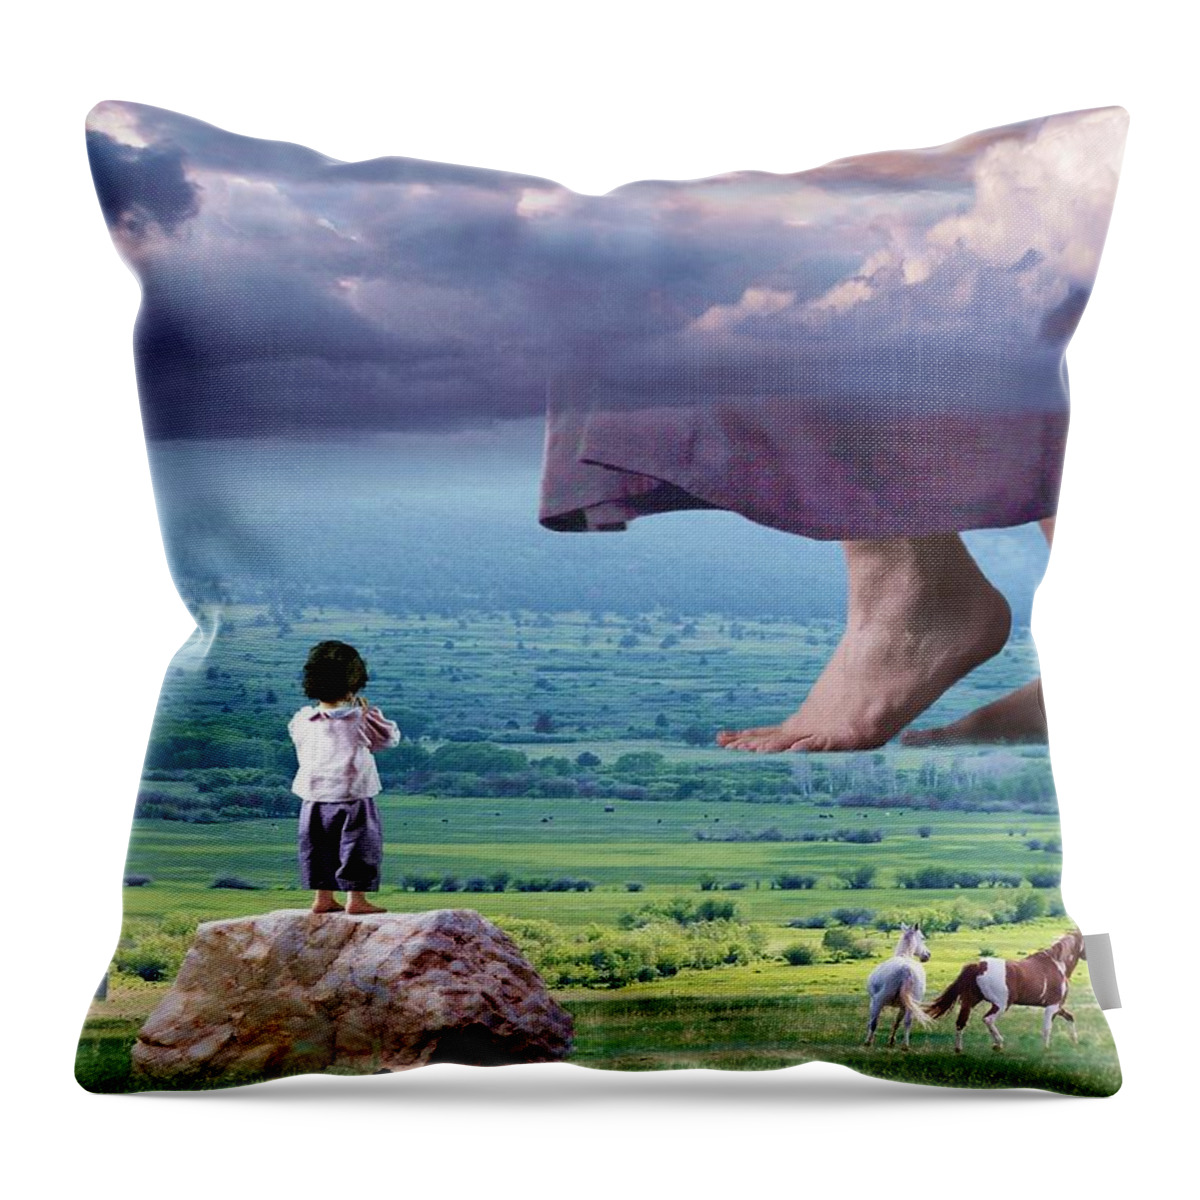  Children Throw Pillow featuring the mixed media He Still Walks Here by Bill Stephens